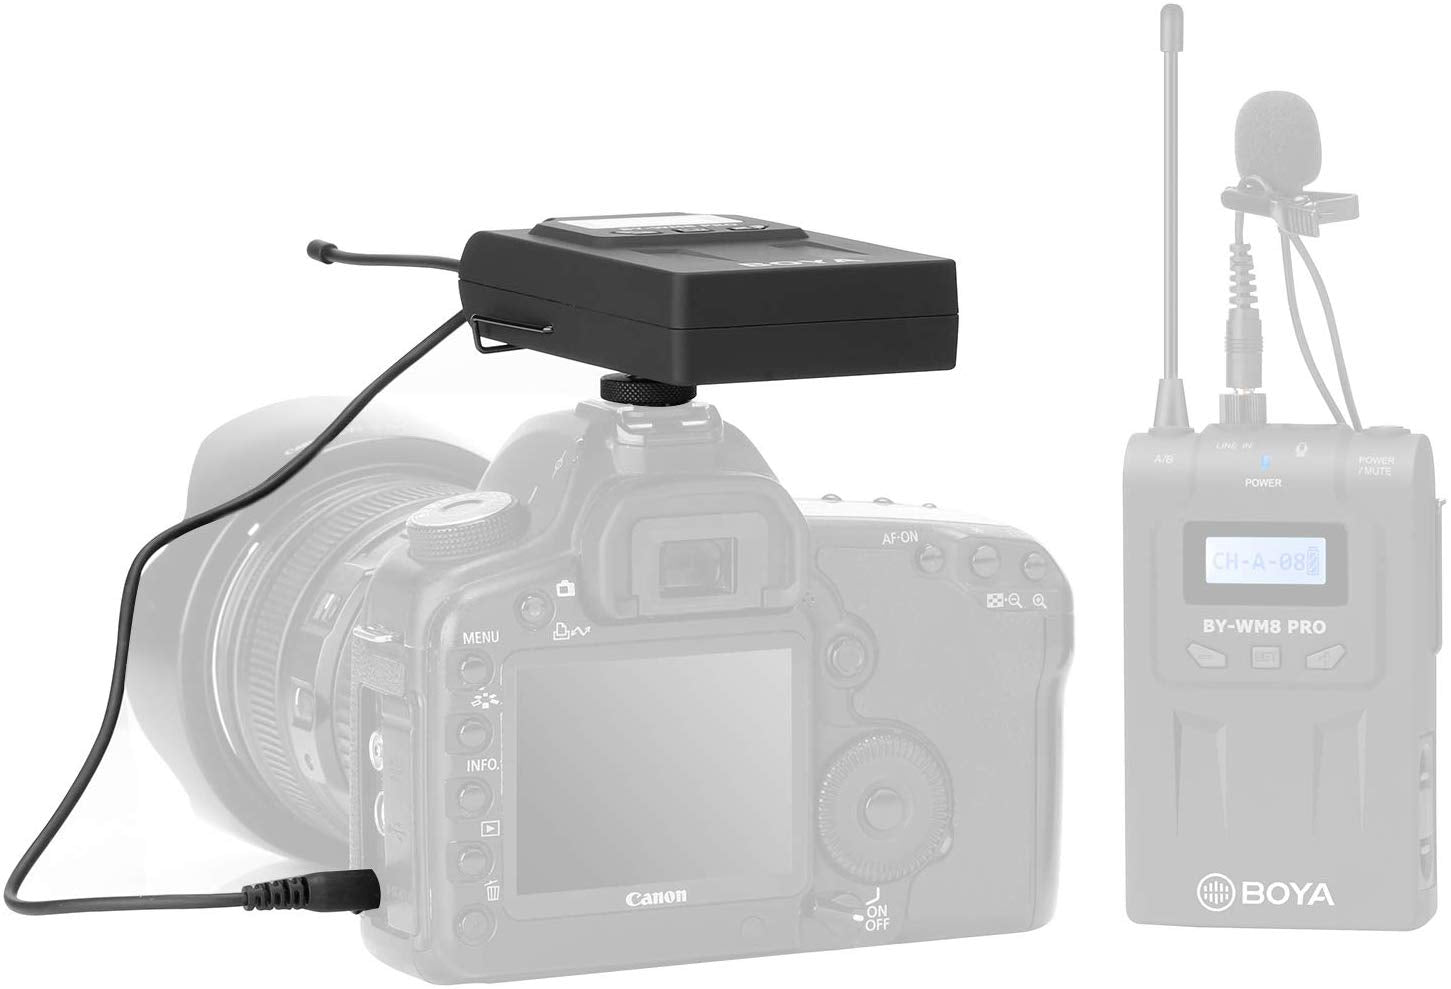 Boya RX8 Pro Dual-channel Wireless Bodypack Receiver Unit with 3.5mm Output Cable & Camera Mounting Shoe for the BY-WM8 PRO Wireless Lavalier Microphone System